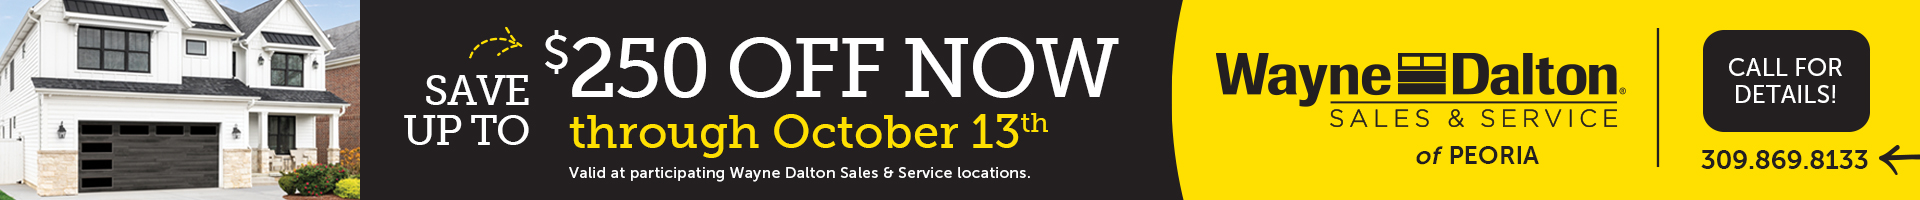 ad web banner that says save up to $250 through October 13th. Call wayne dalton sales and service peoria for details.